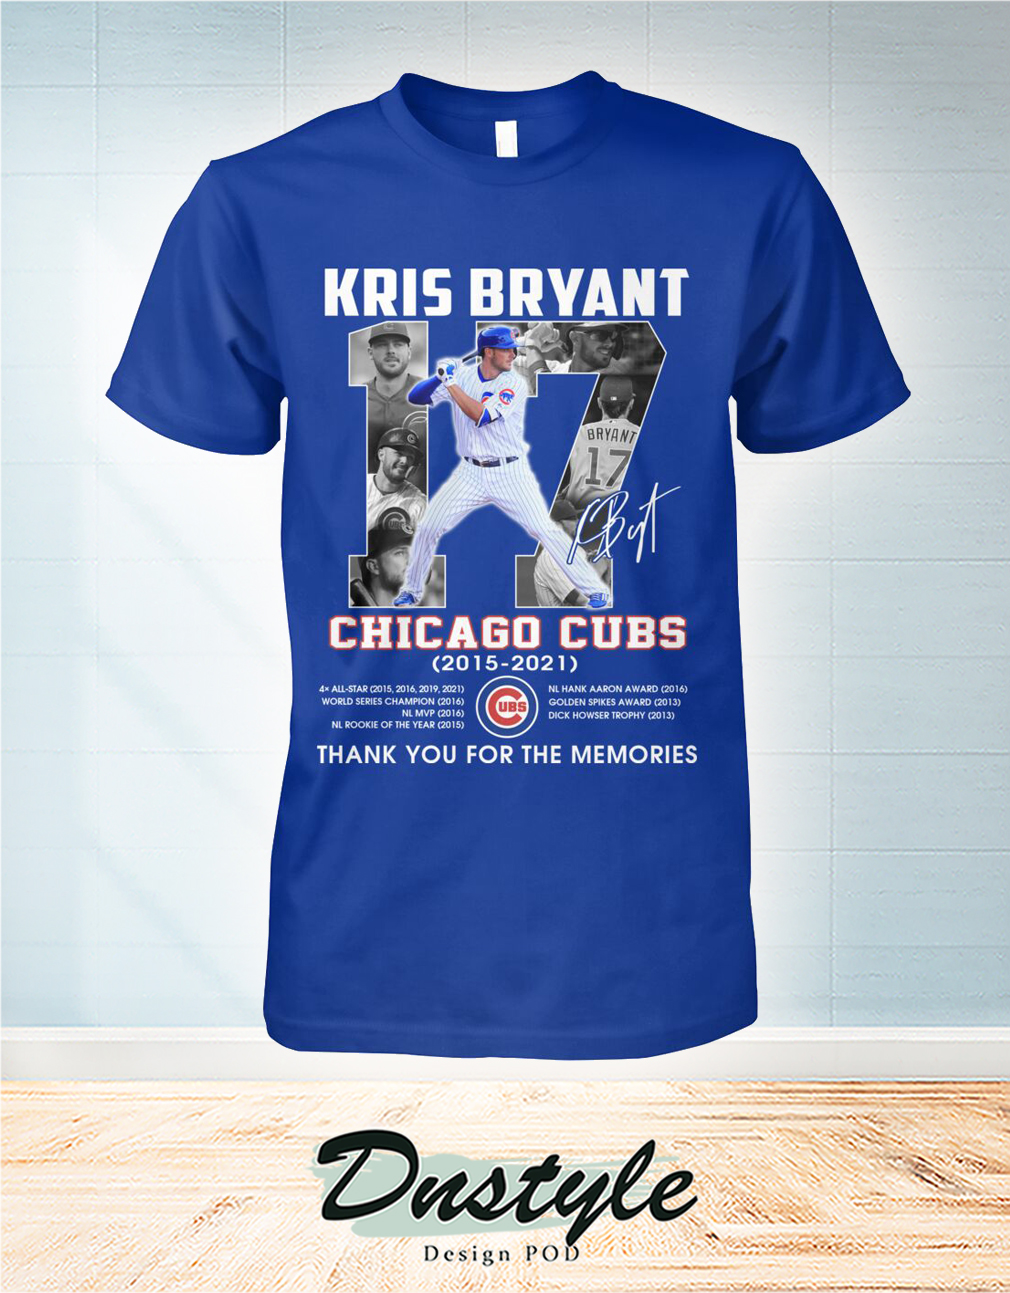 Chicago cubs Kris Bryant 17 signature thank you for the memories shirt